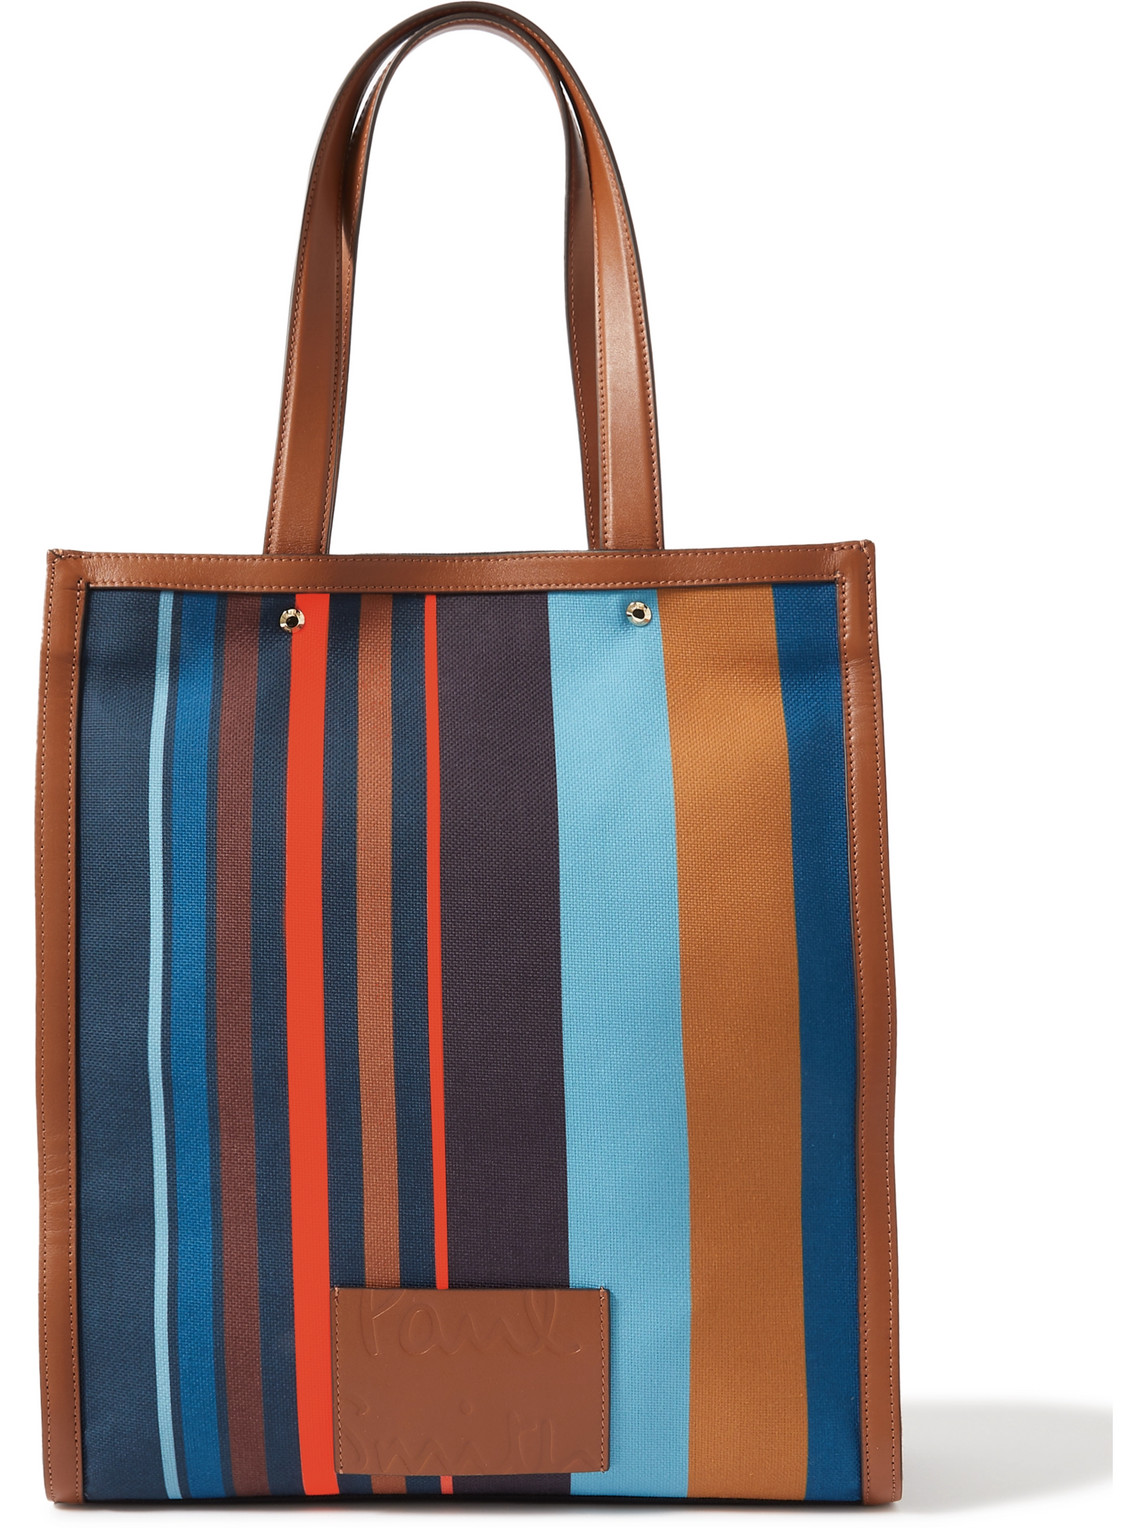 PAUL SMITH LEATHER-TRIMMED STRIPED RECYCLED CANVAS TOTE BAG